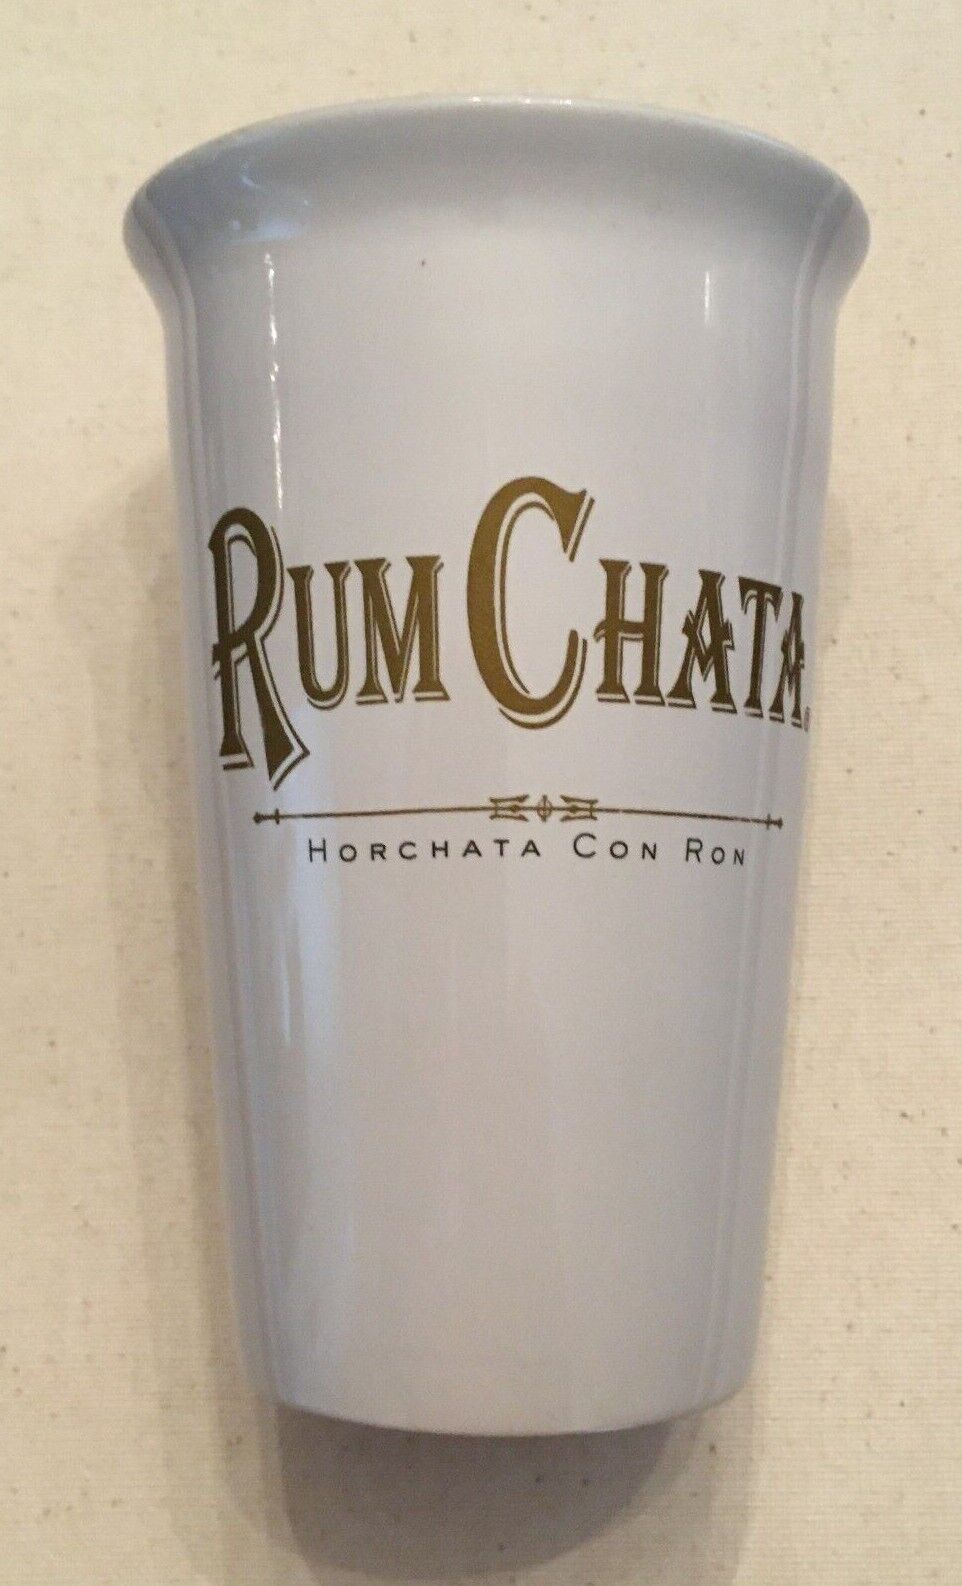 Rum Chata, Horchata Con Ron, Porcelain Drinking Cup